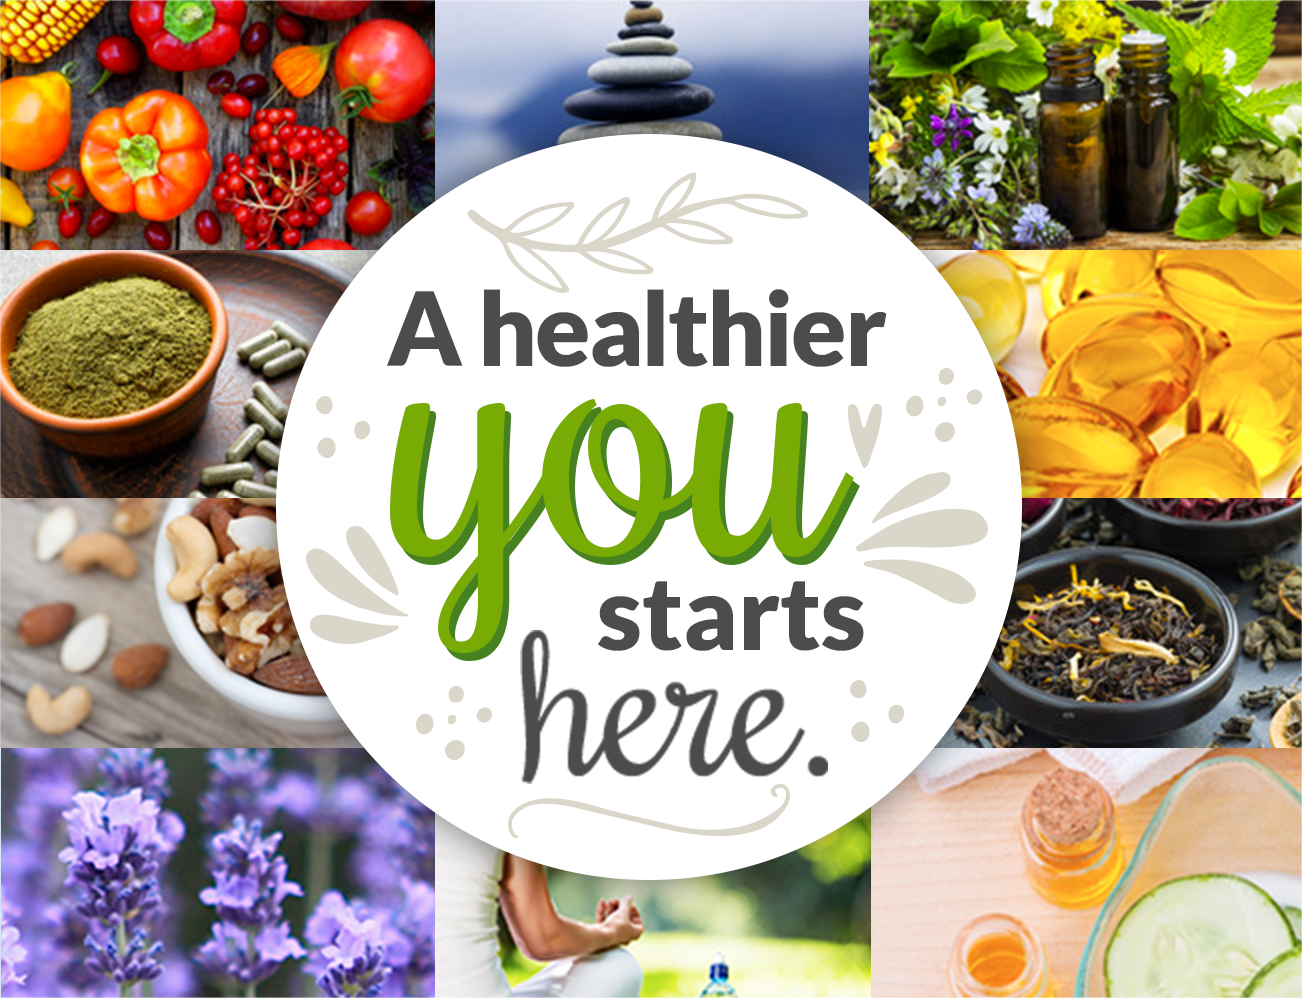 A healthier you starts here.